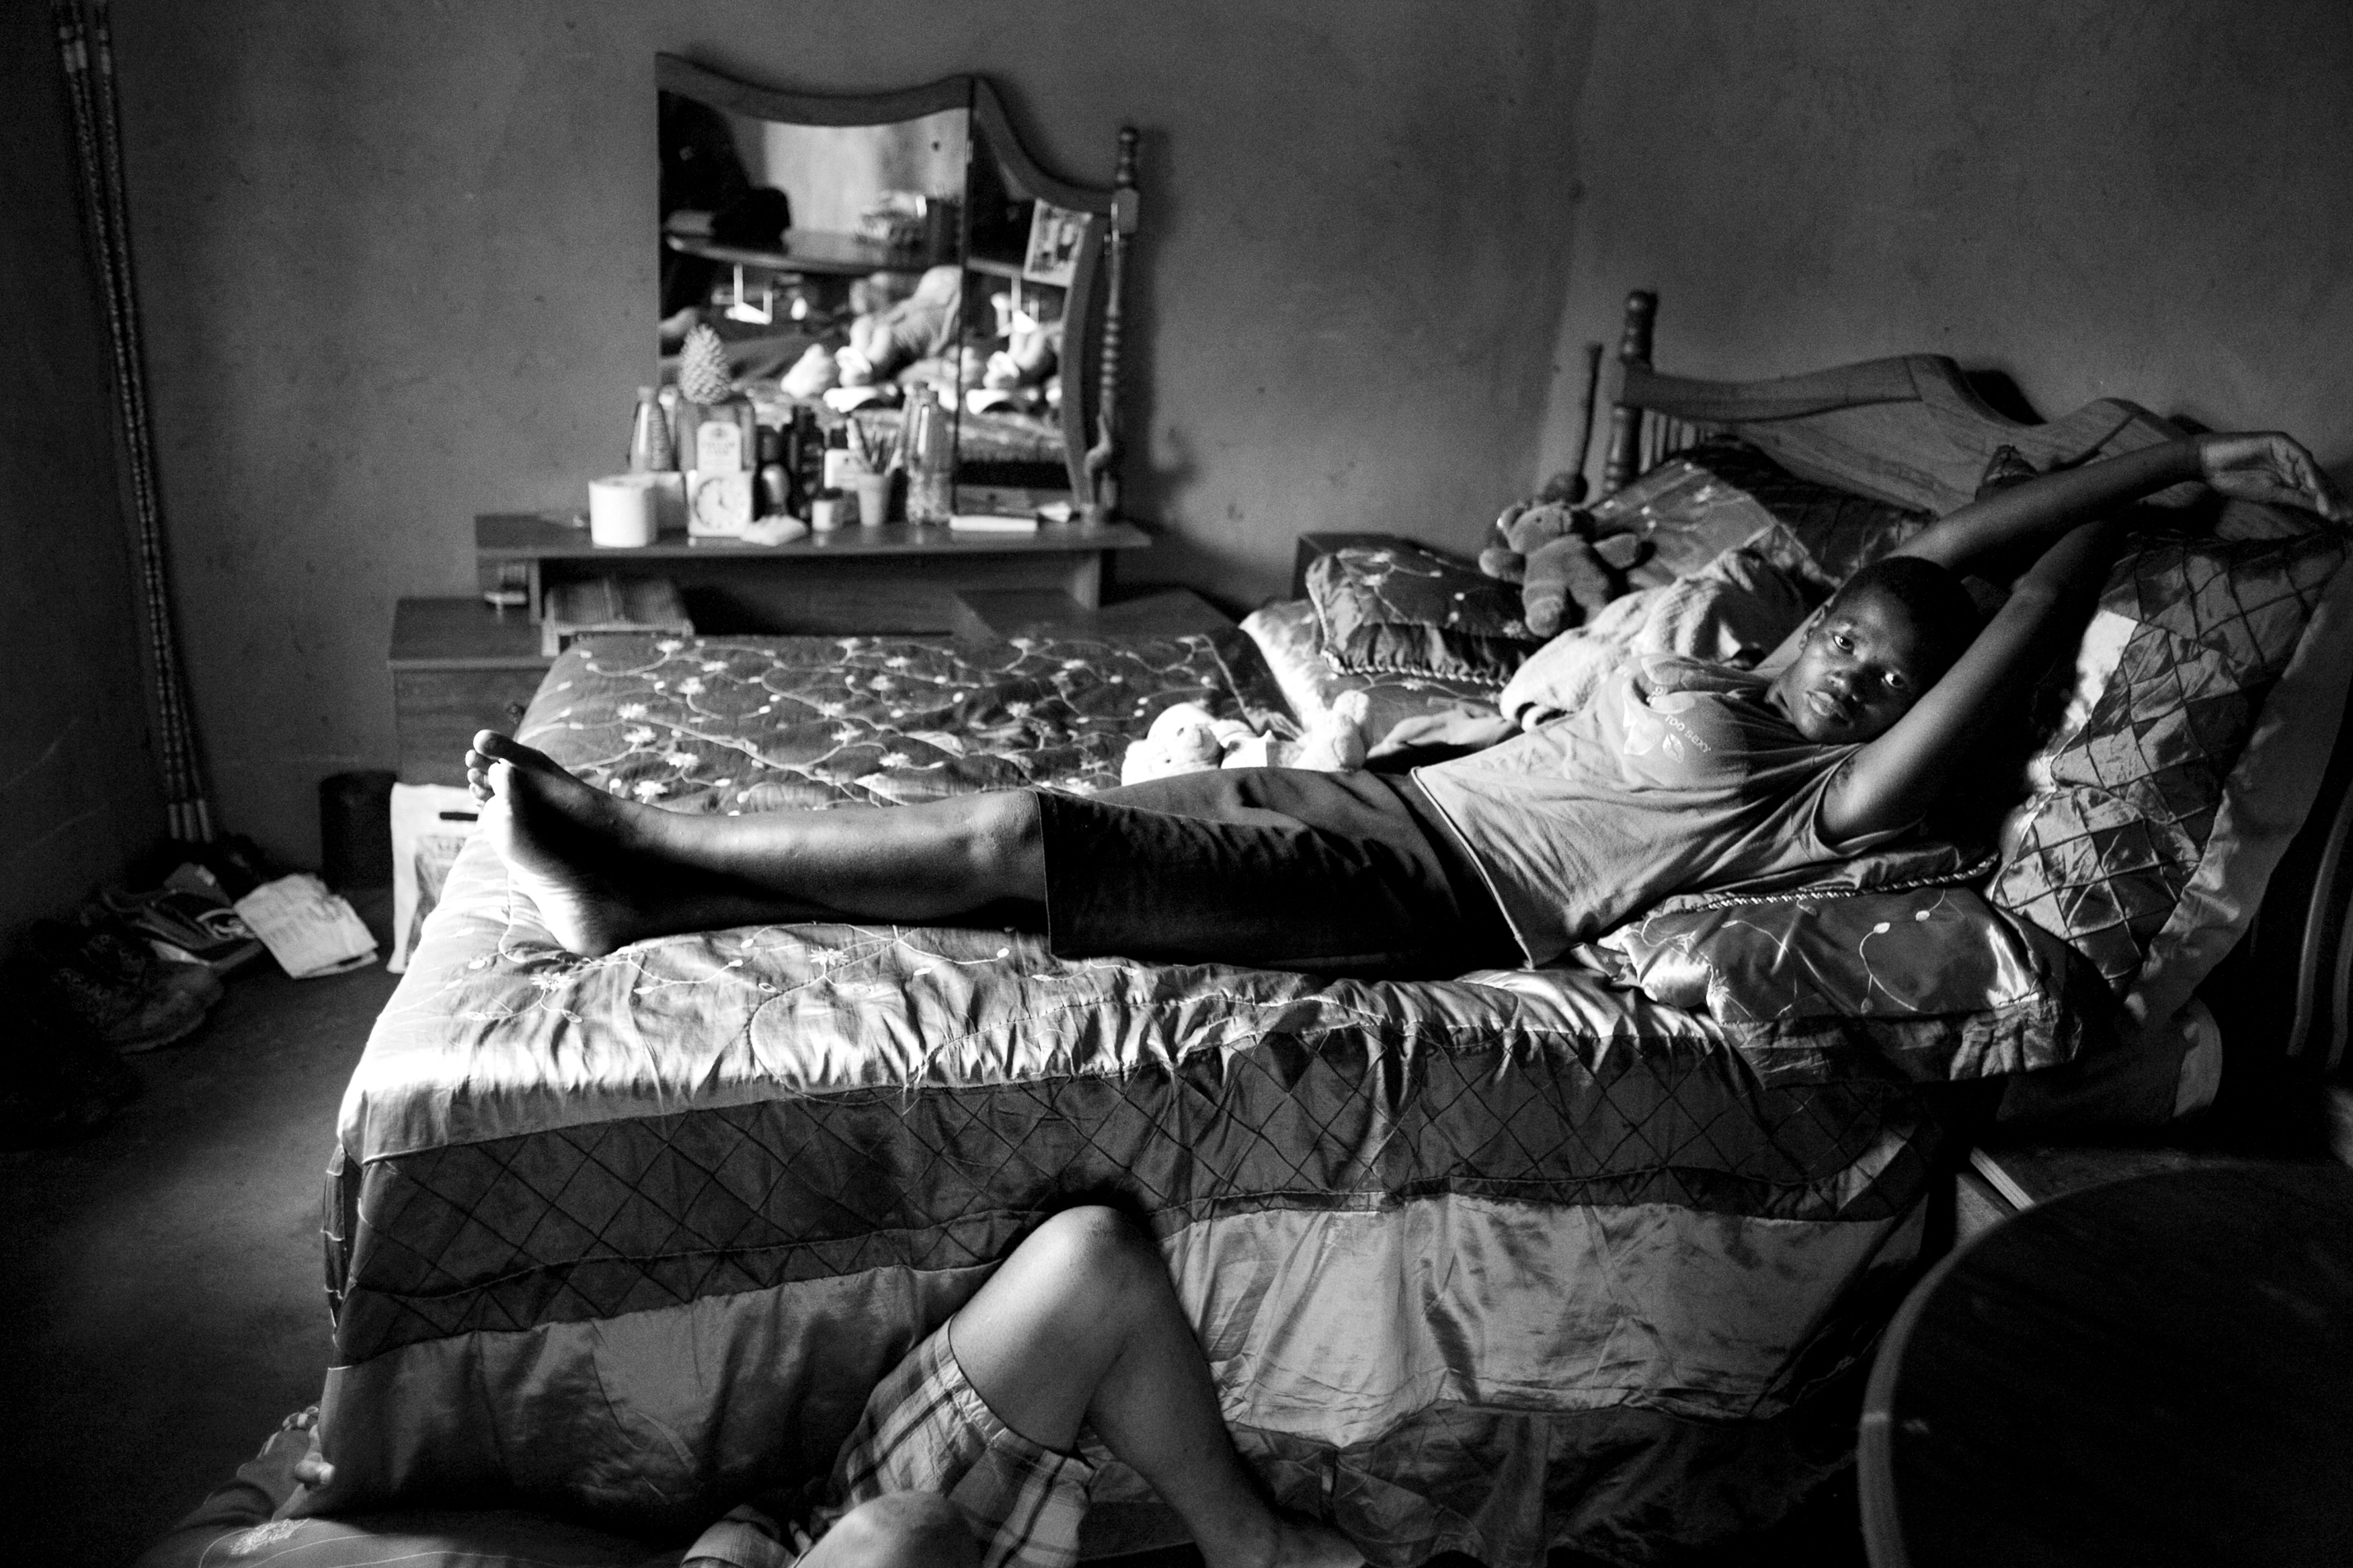 A young couple, both in their 20s, relax in their one bedroom home on a hot summer day. Many young couples live together before marriage if they cannot afford the lobola to marry.